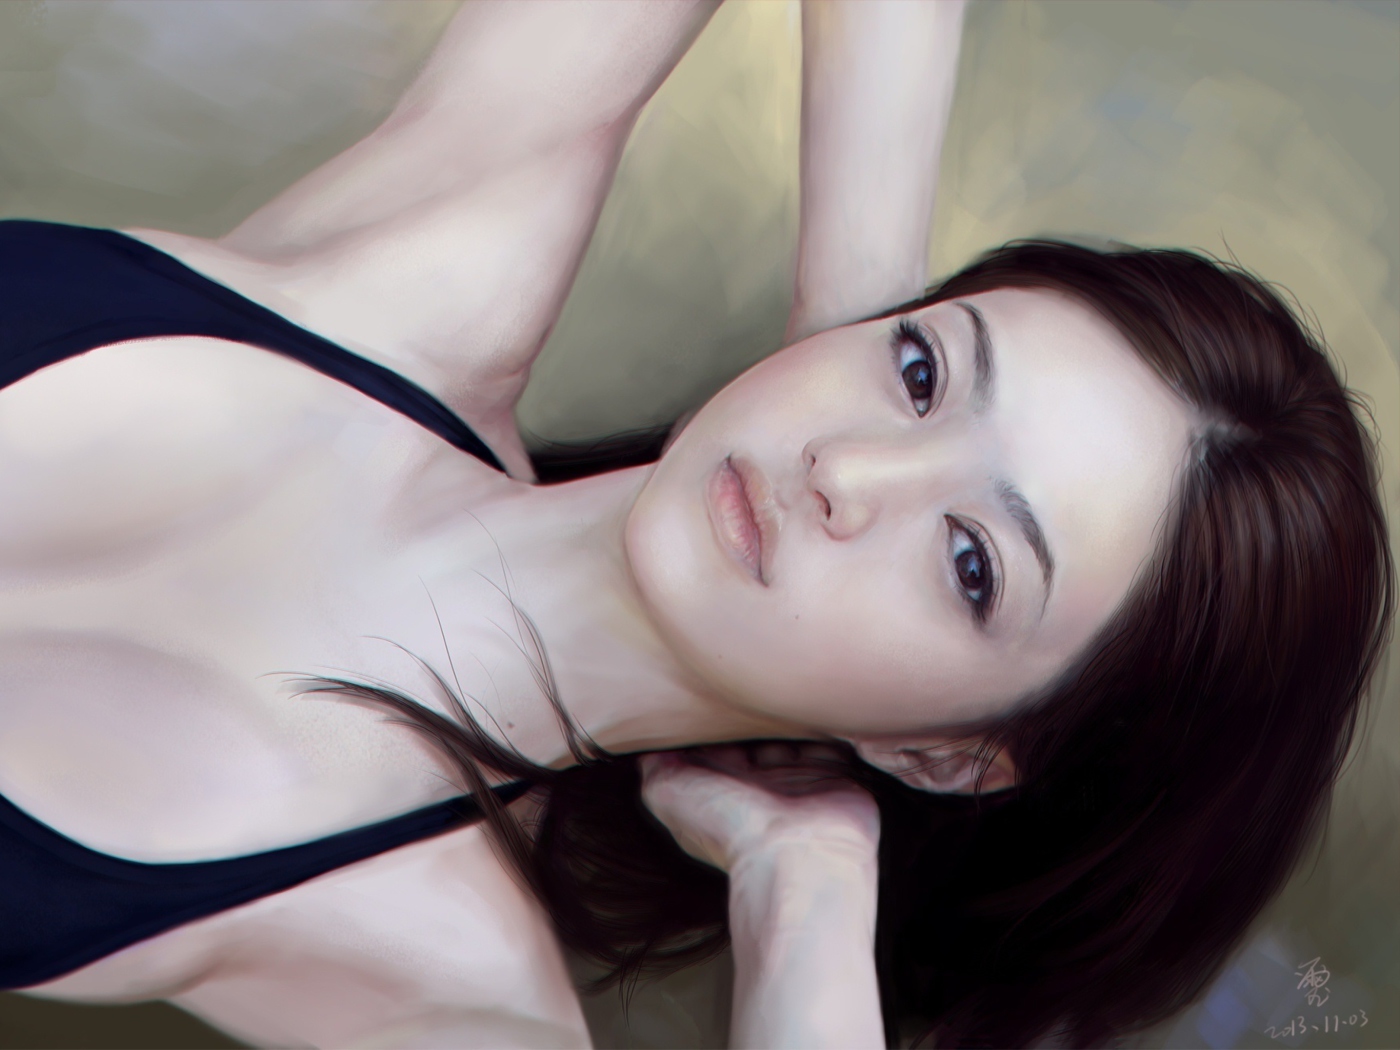 Das Girl's Face Realistic Painting Wallpaper 1400x1050